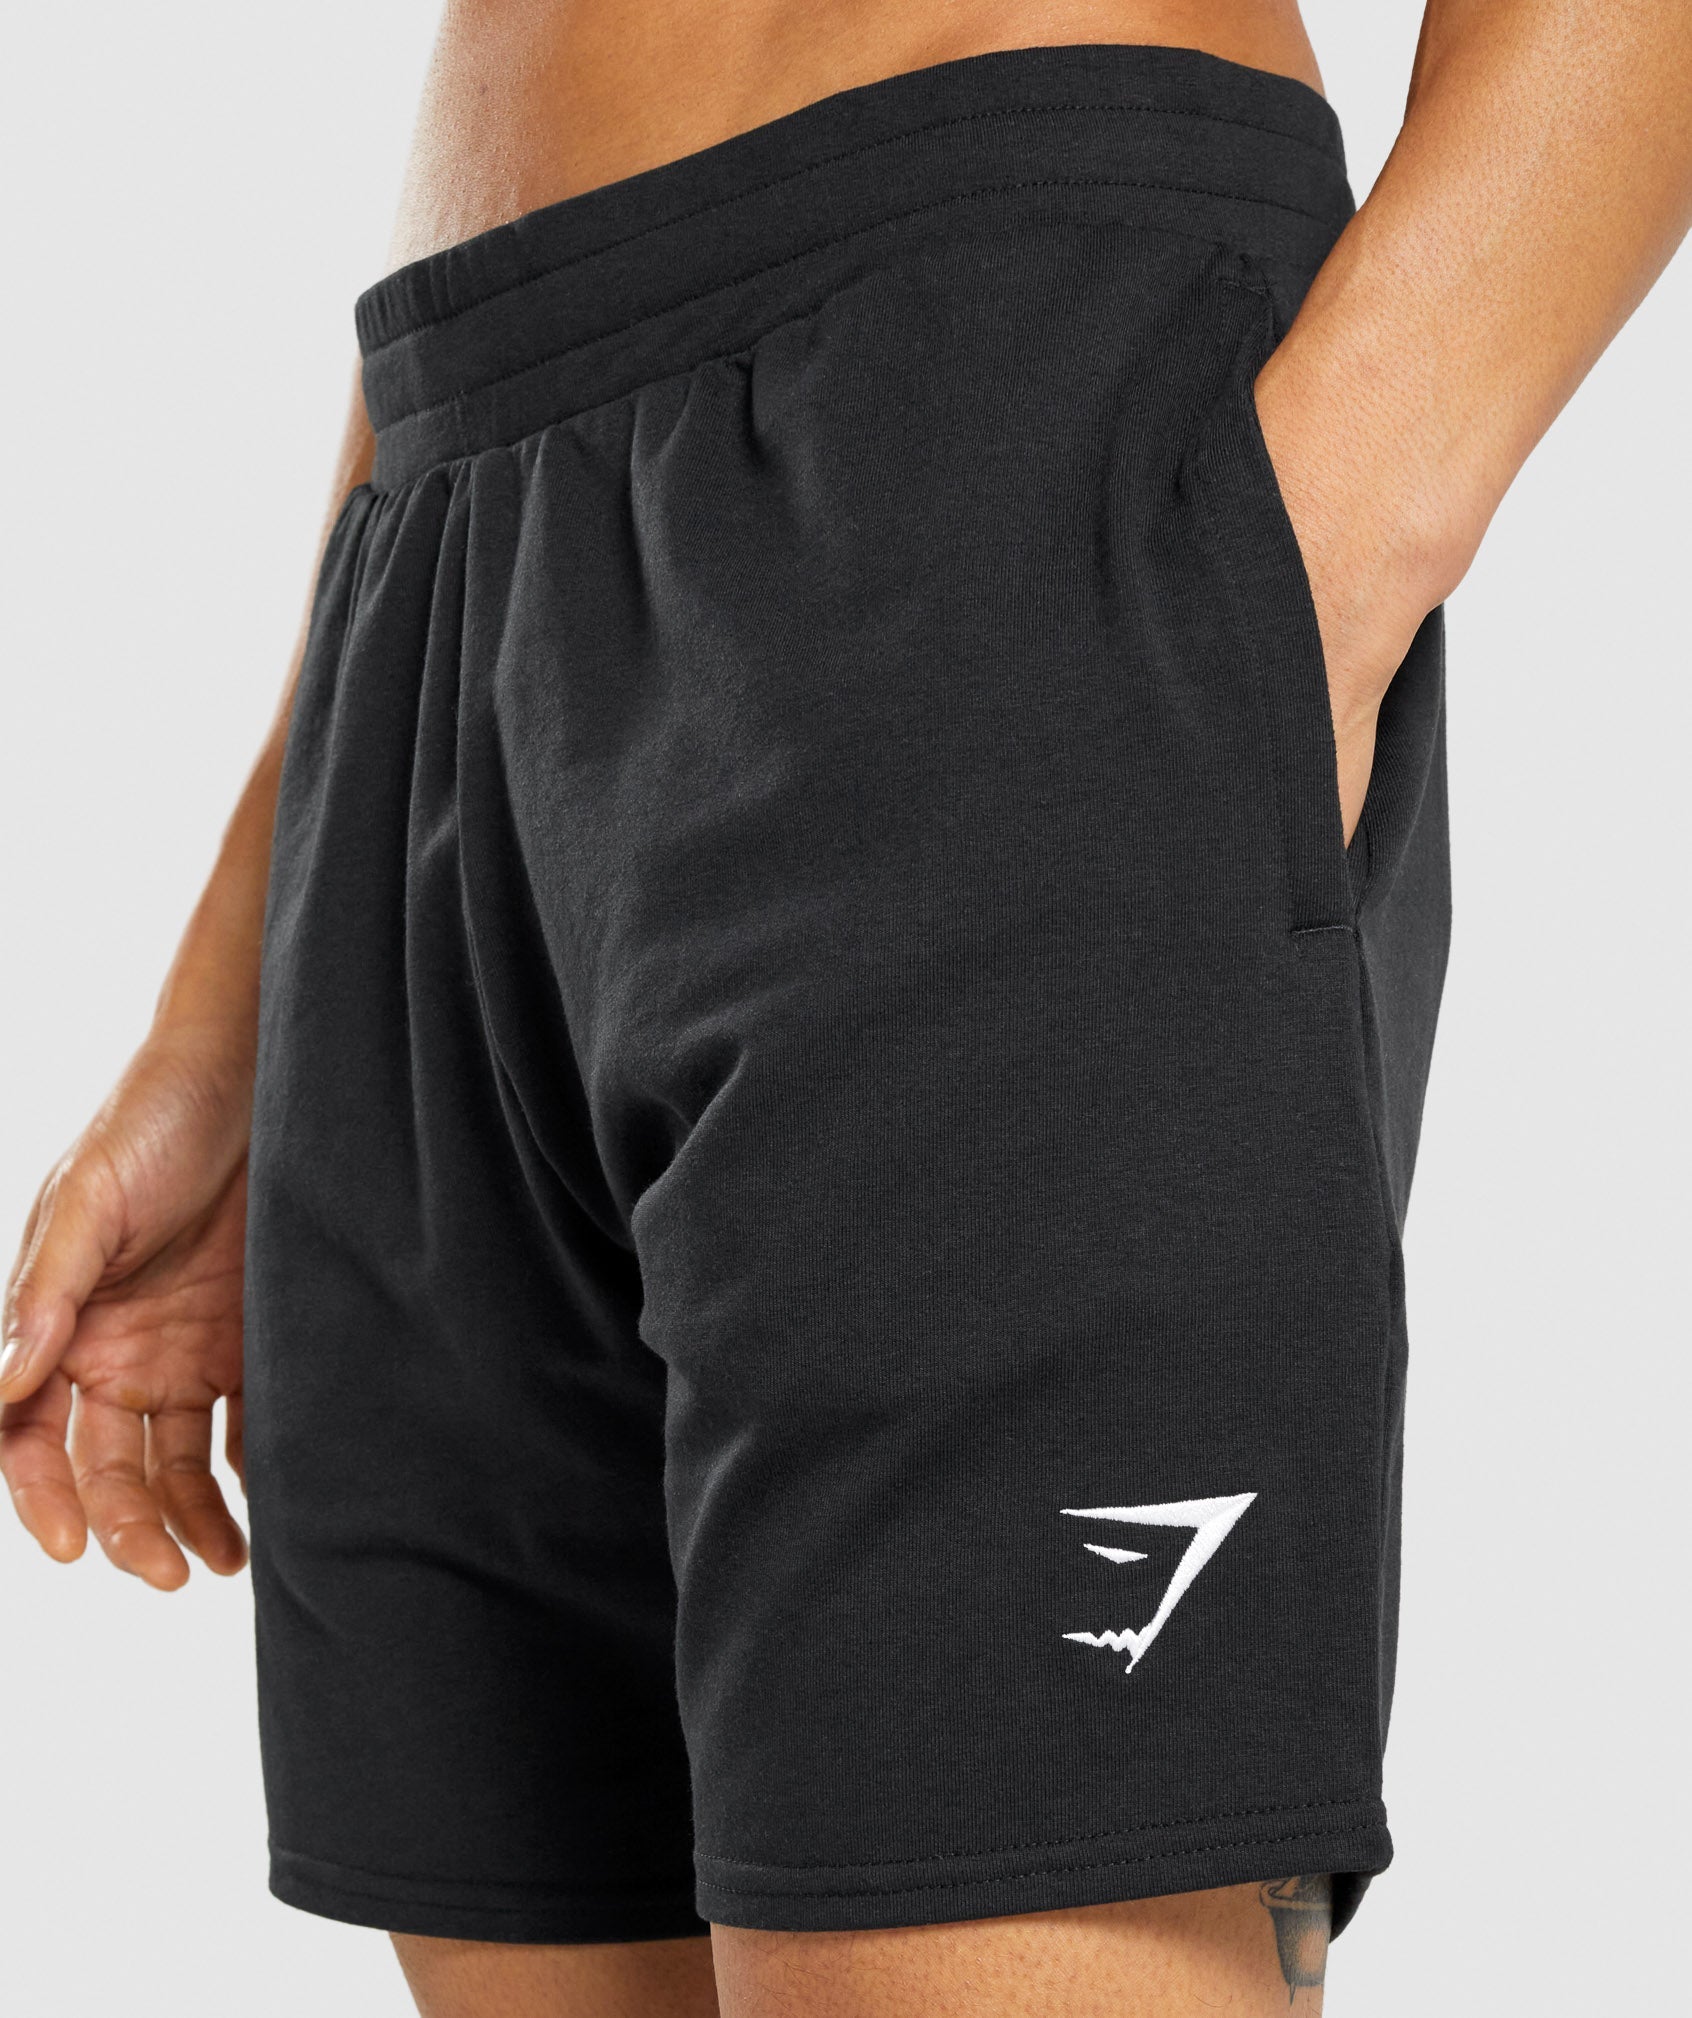 Essential 7" Shorts in Black - view 5